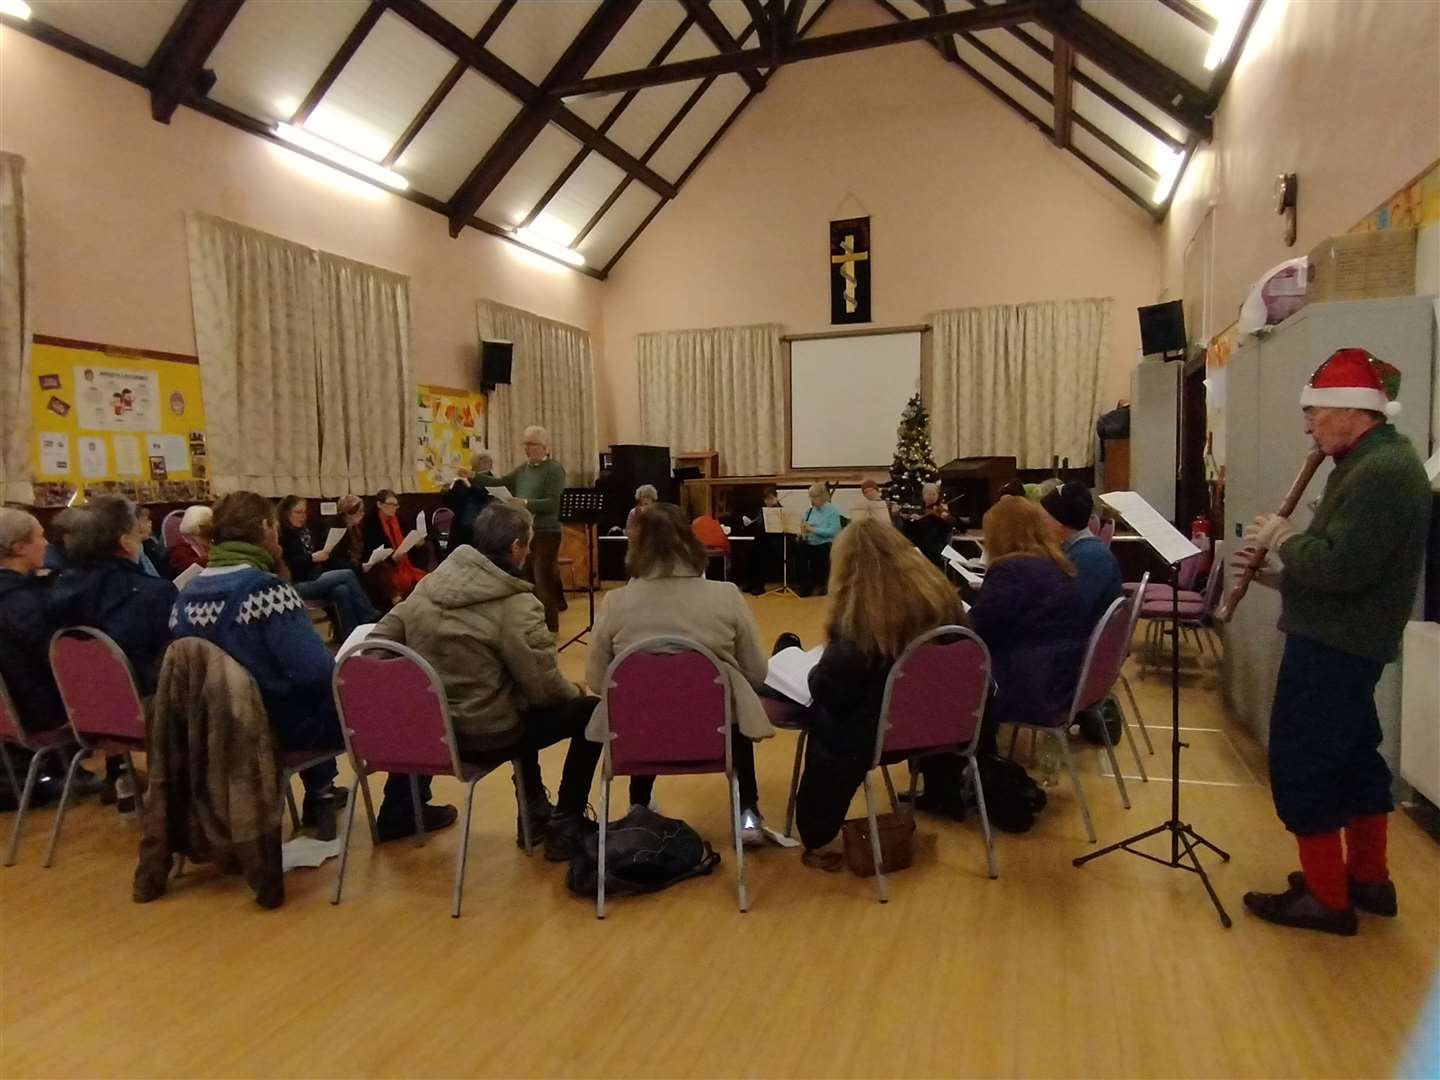 This carol session is being run in St Leonard's Church Hall.